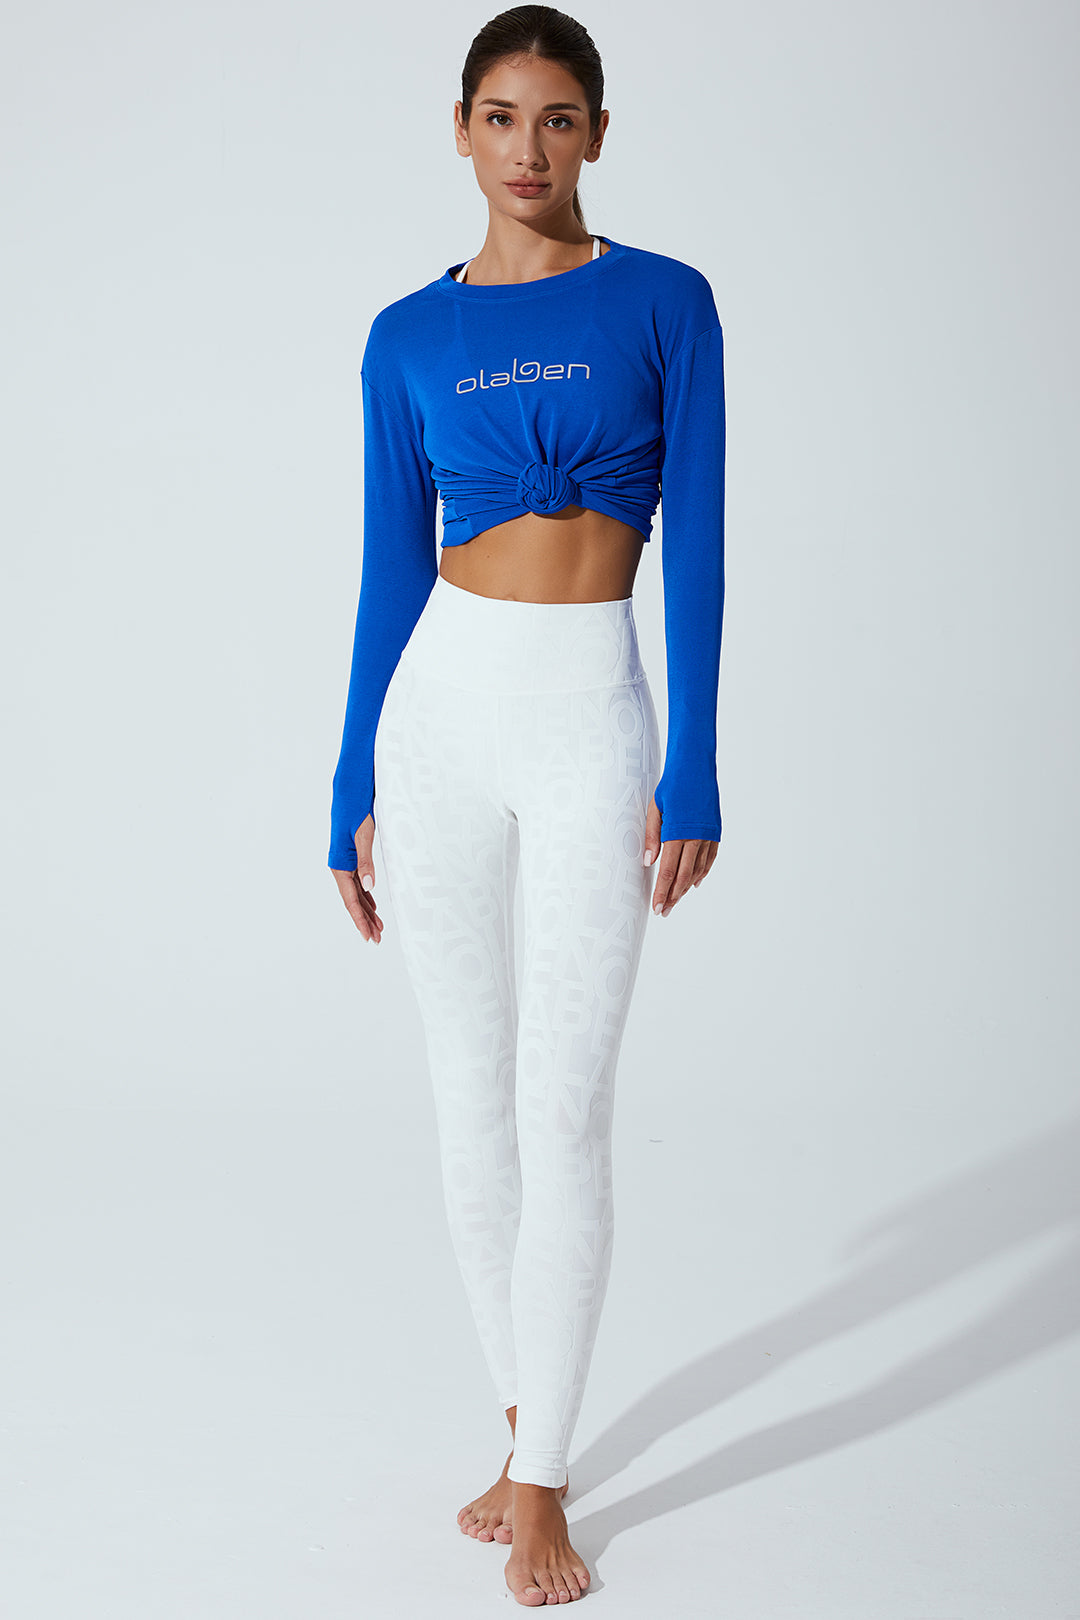 Stylish ultramarine blue long sleeves top for women, perfect for any occasion